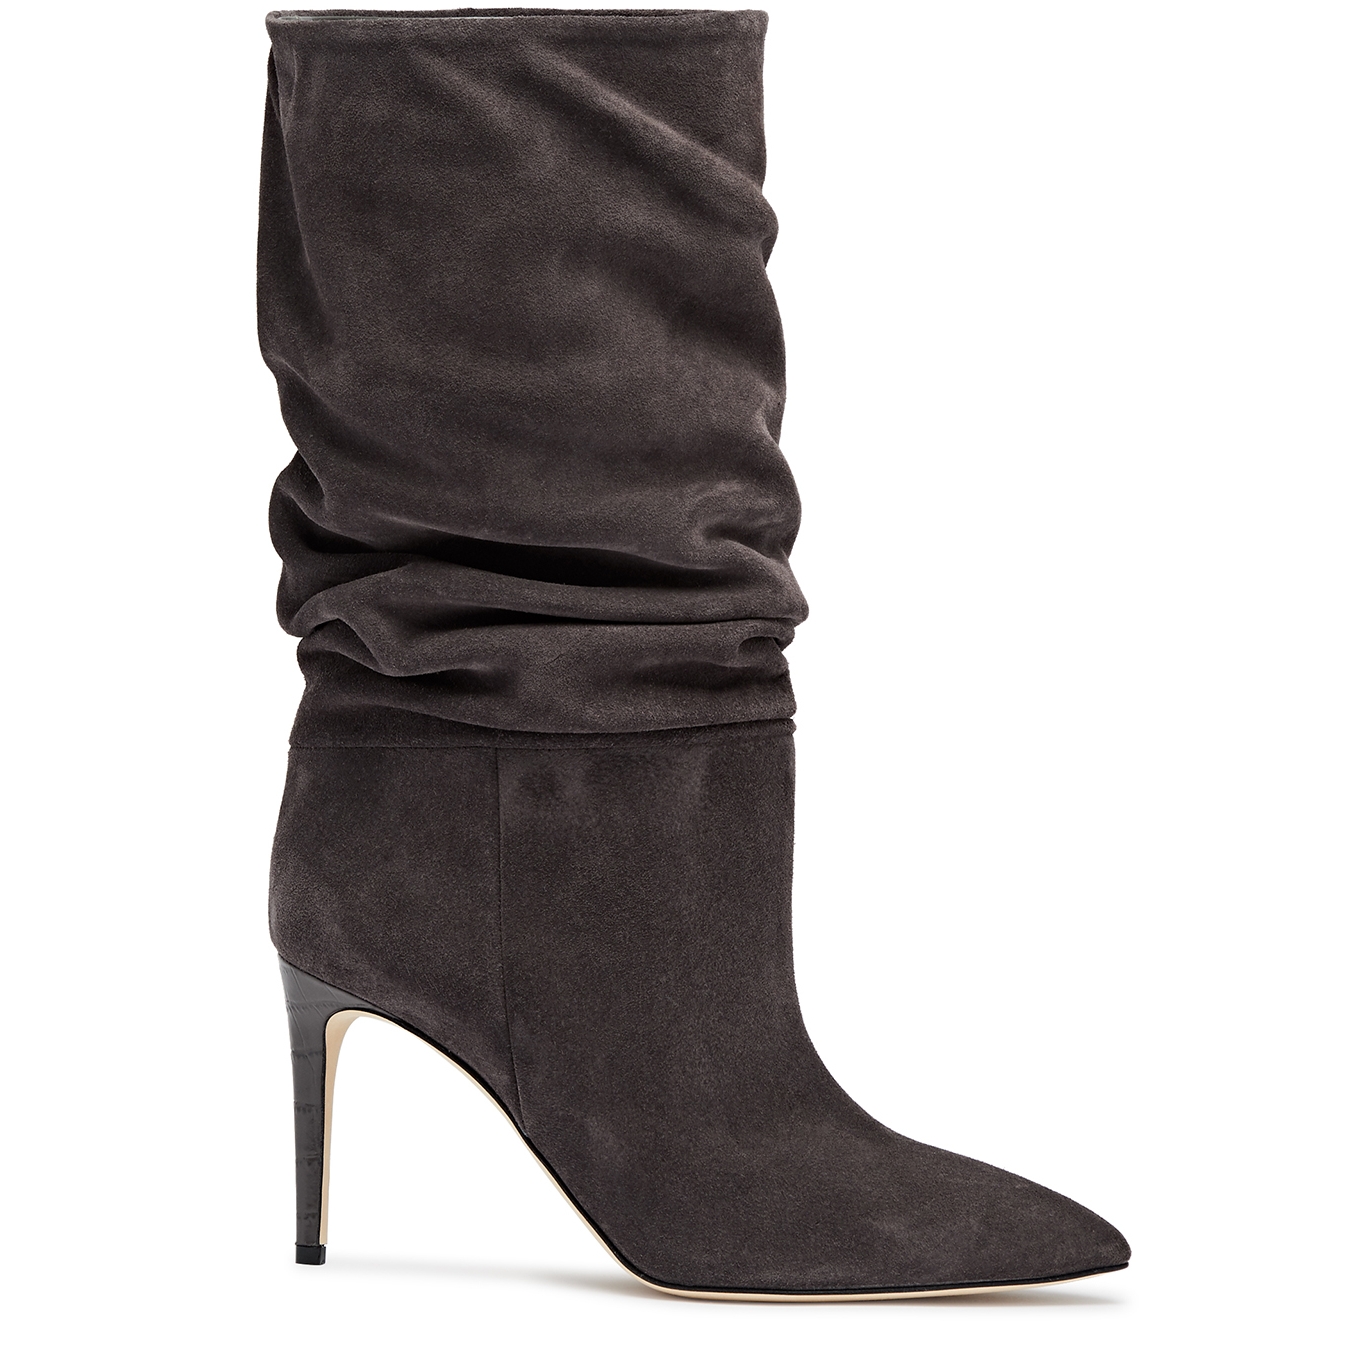 Paris Texas Slouchy 85 Suede Knee-high Boots